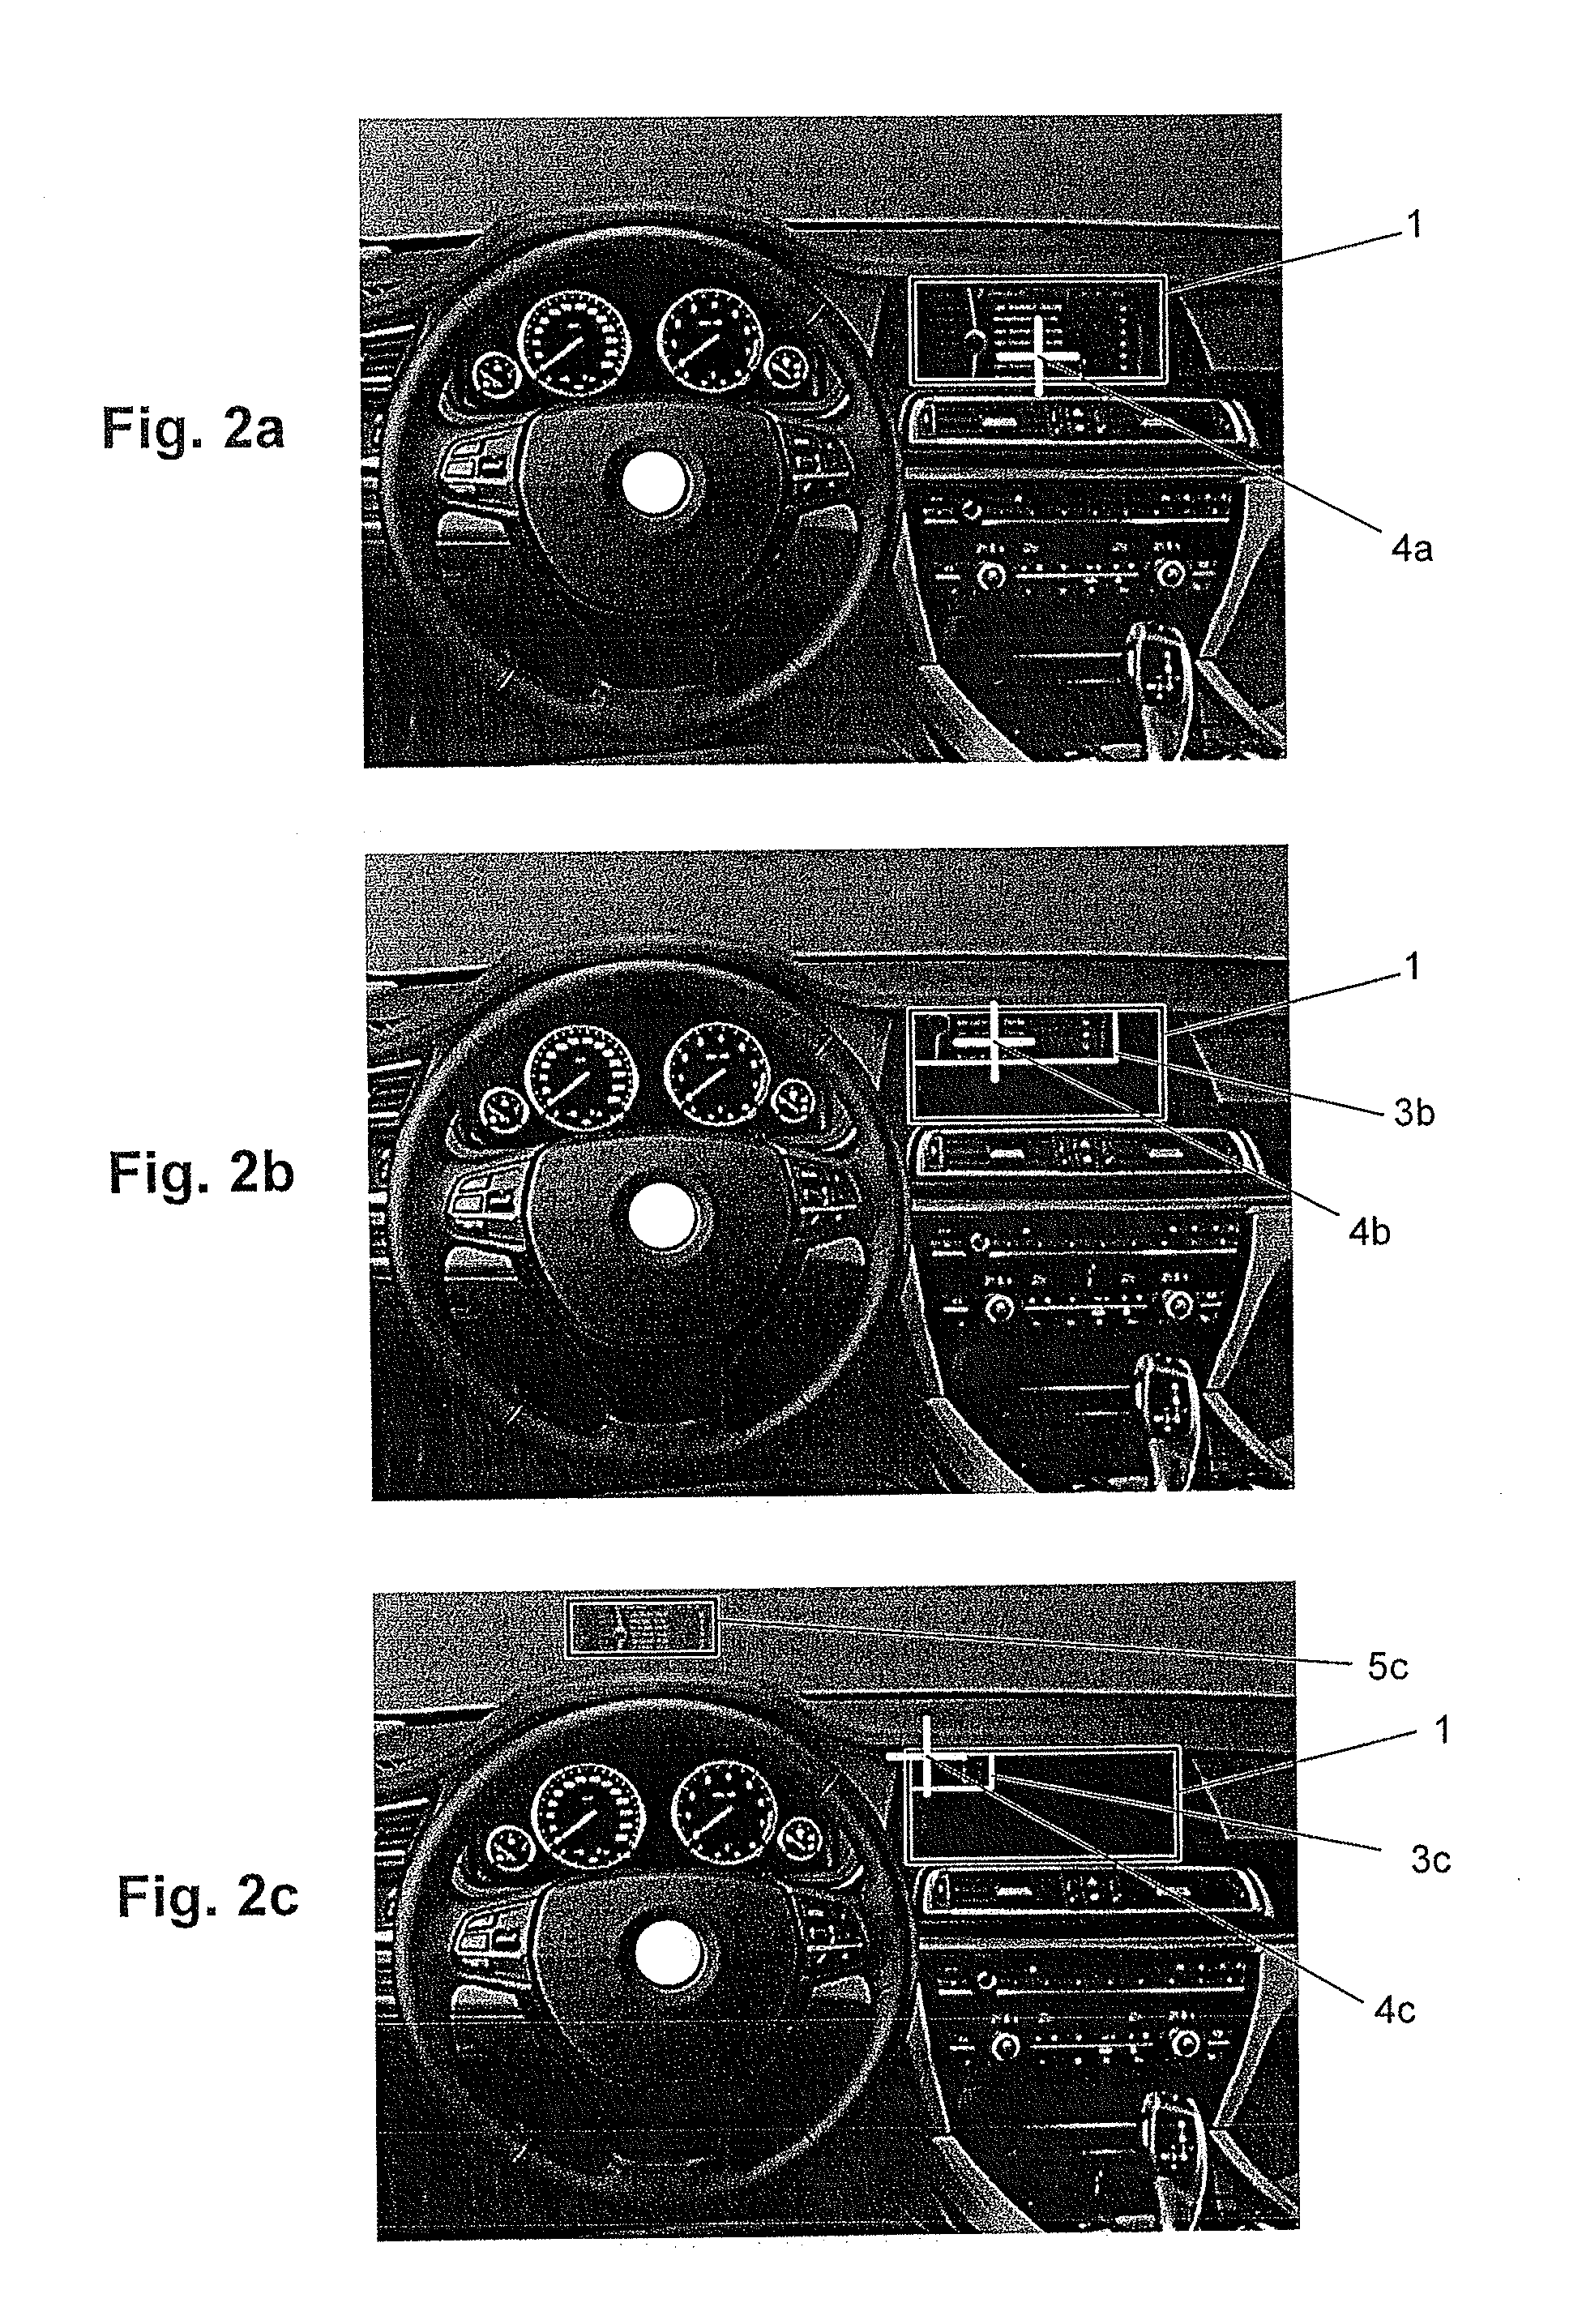 Motor Vehicle Having a Device for Influencing the Viewing Direction of the Driver